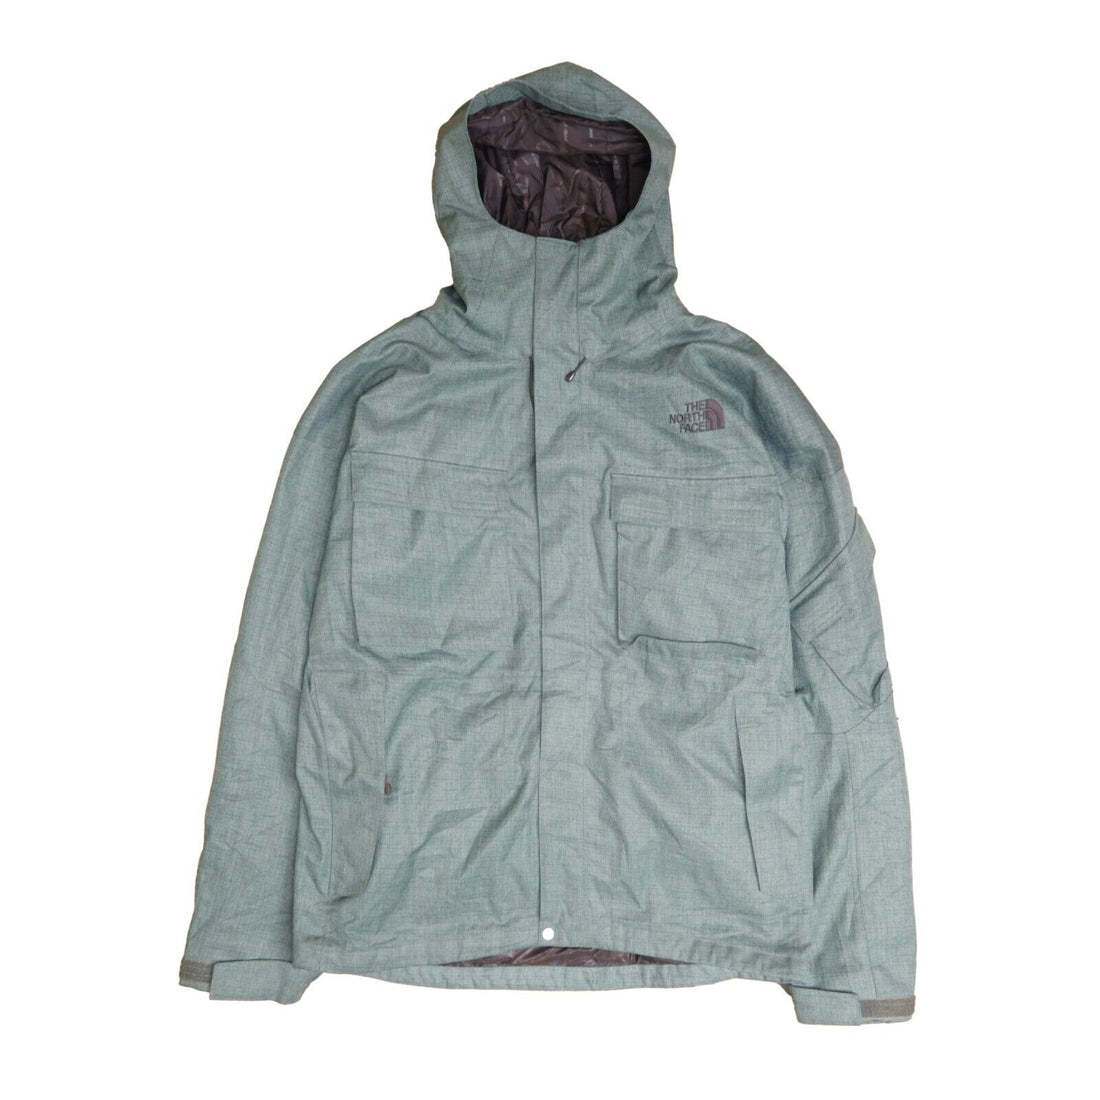 The North Face Hyvent Coat Jacket Size Large Green – Throwback Vault